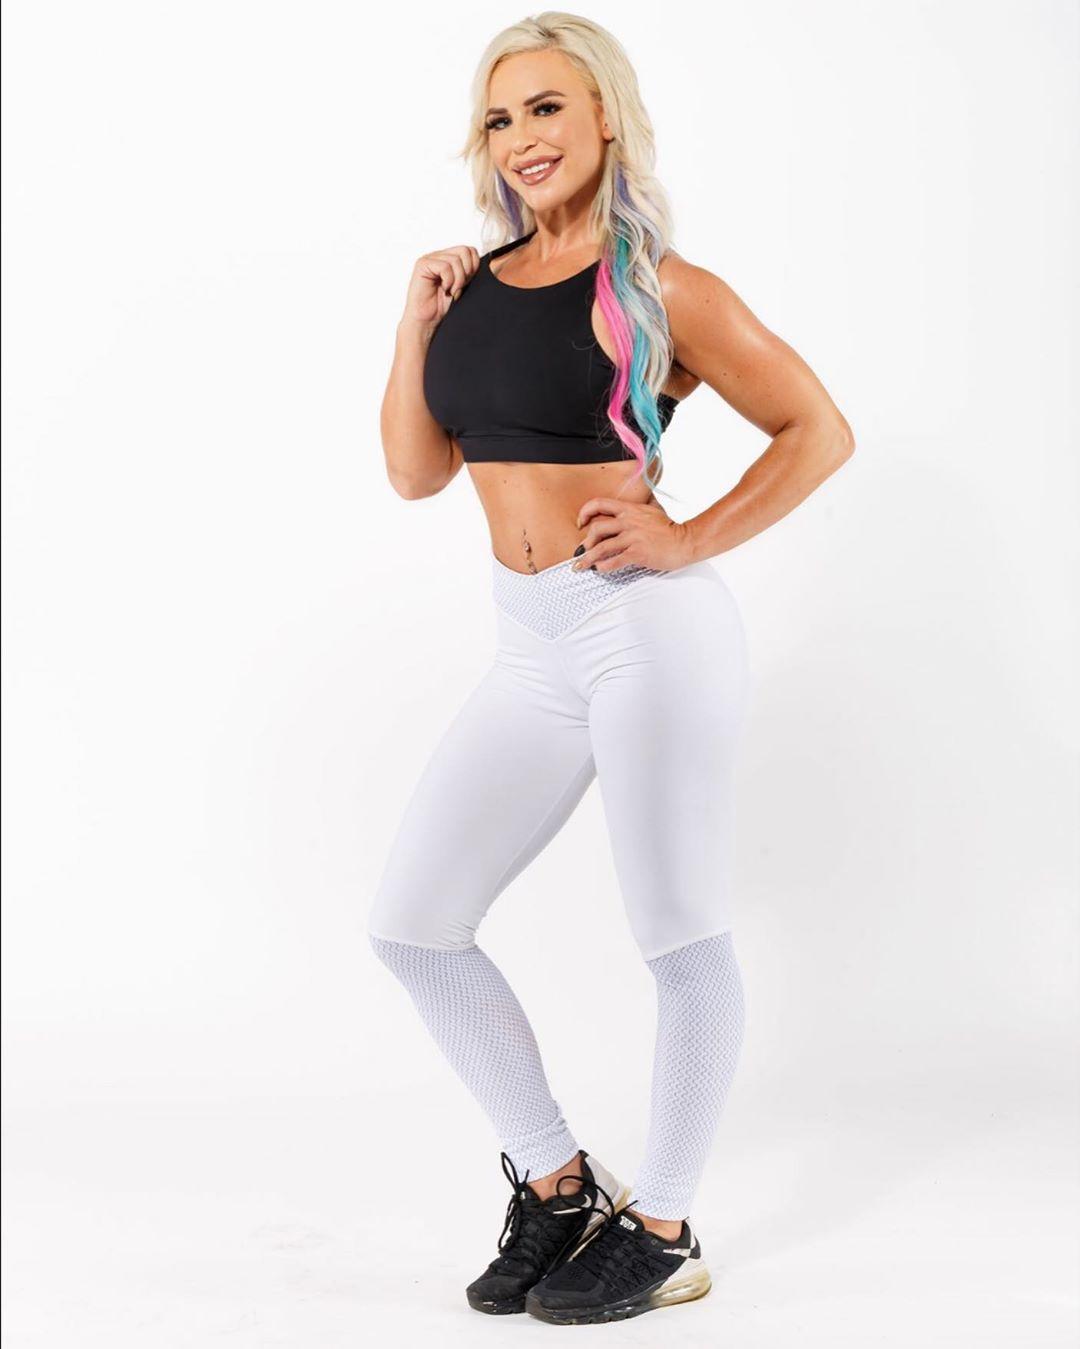 70+ Hot Pictures Of Dana Brooke Show Off This WWE Diva’s Sexy Body 11